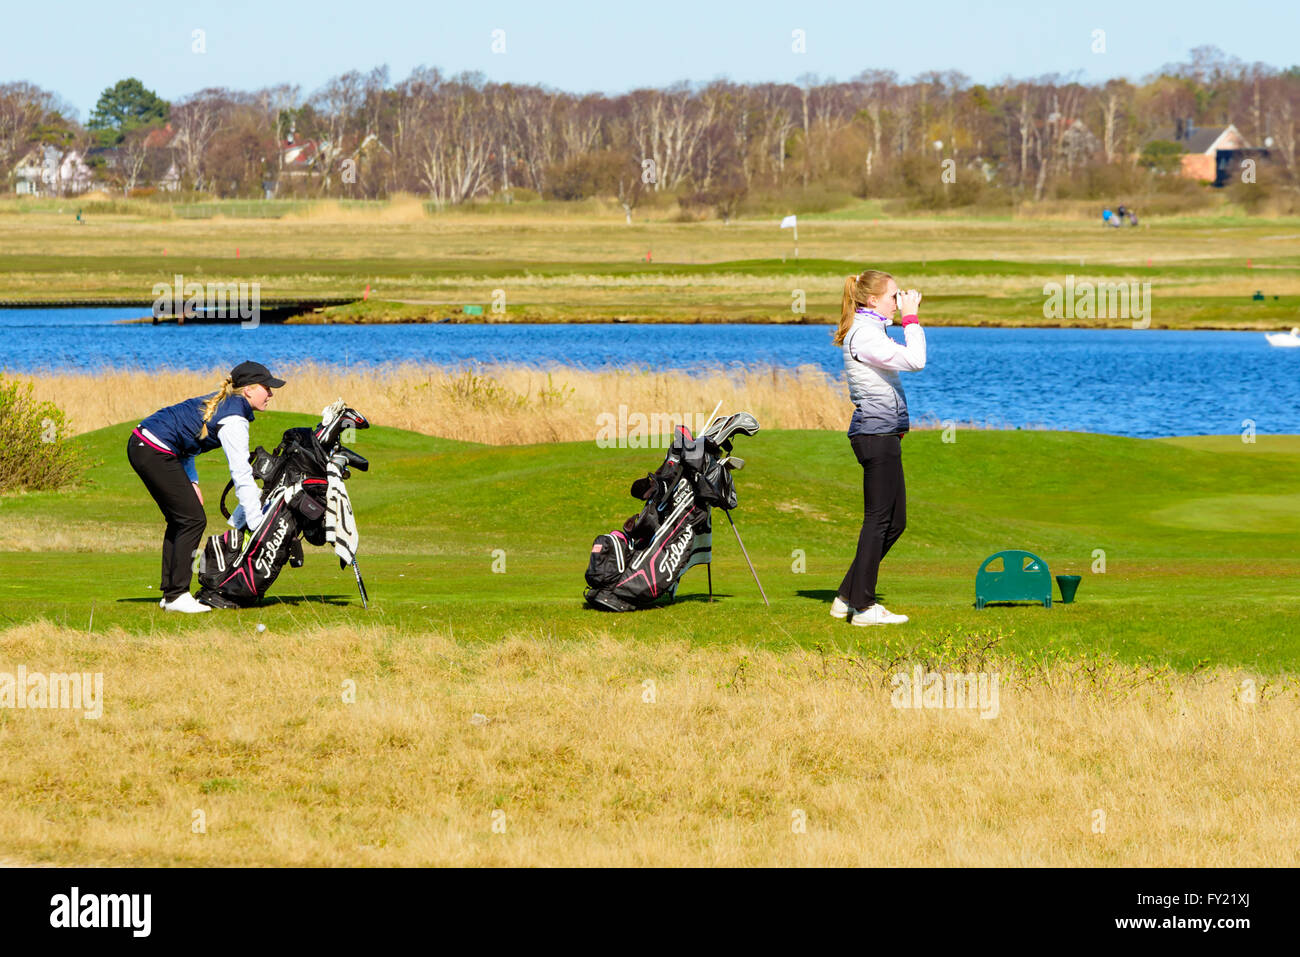 Skanor, Sweden - April 11, 2016: Two young female golfers look away into the distance to see how a ball played out on the course Stock Photo